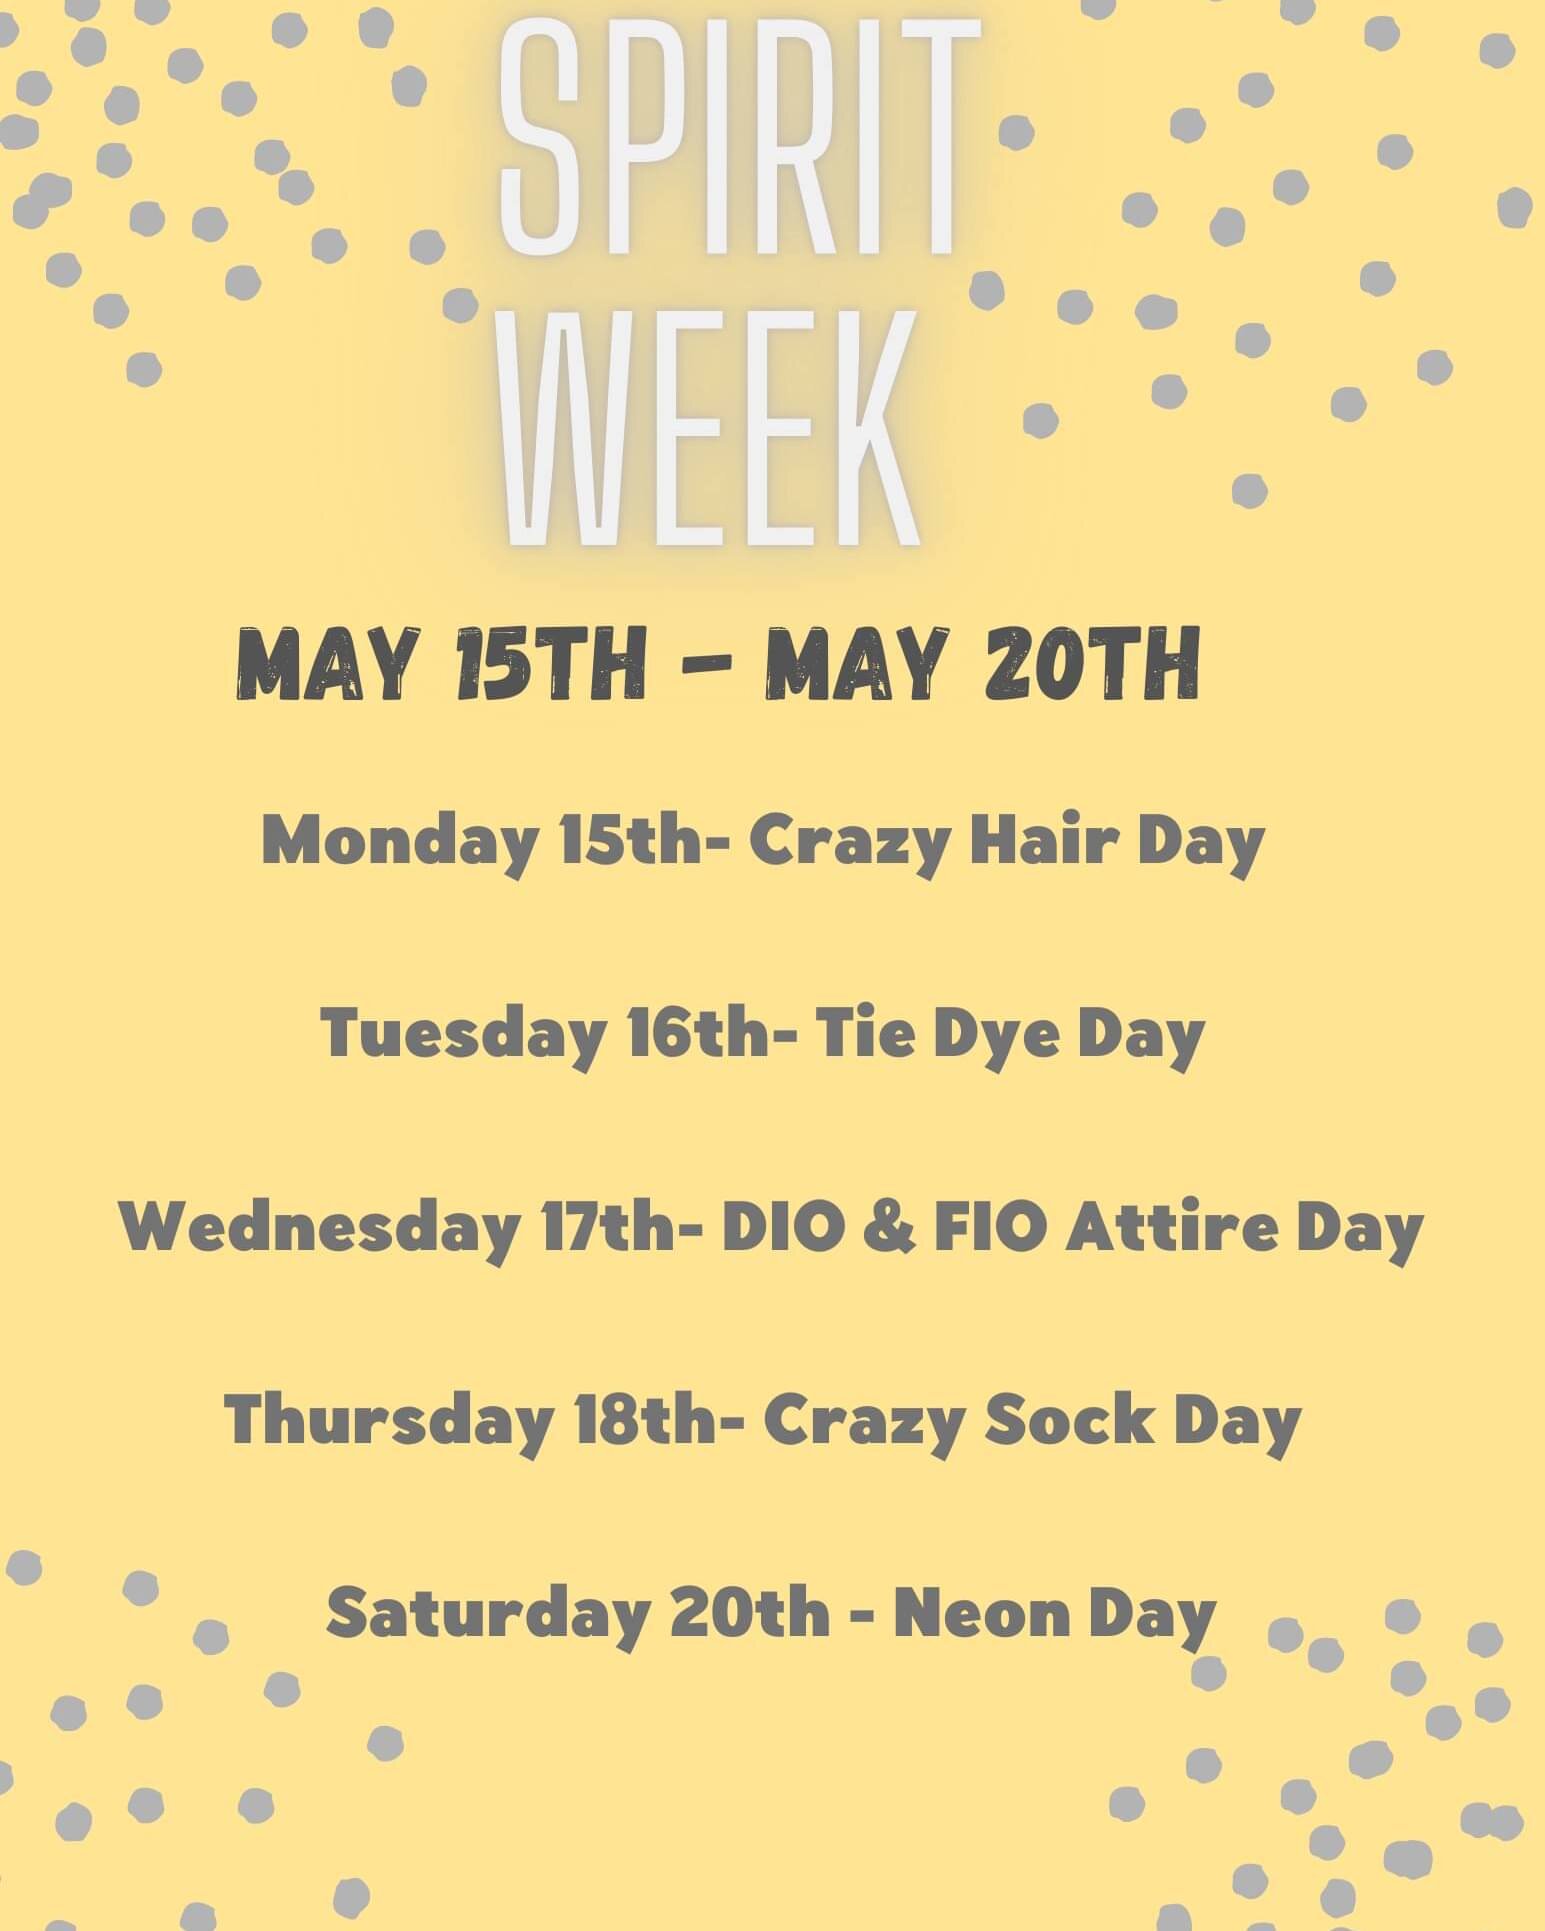 Next week is spirit week!  Be ready to show off!